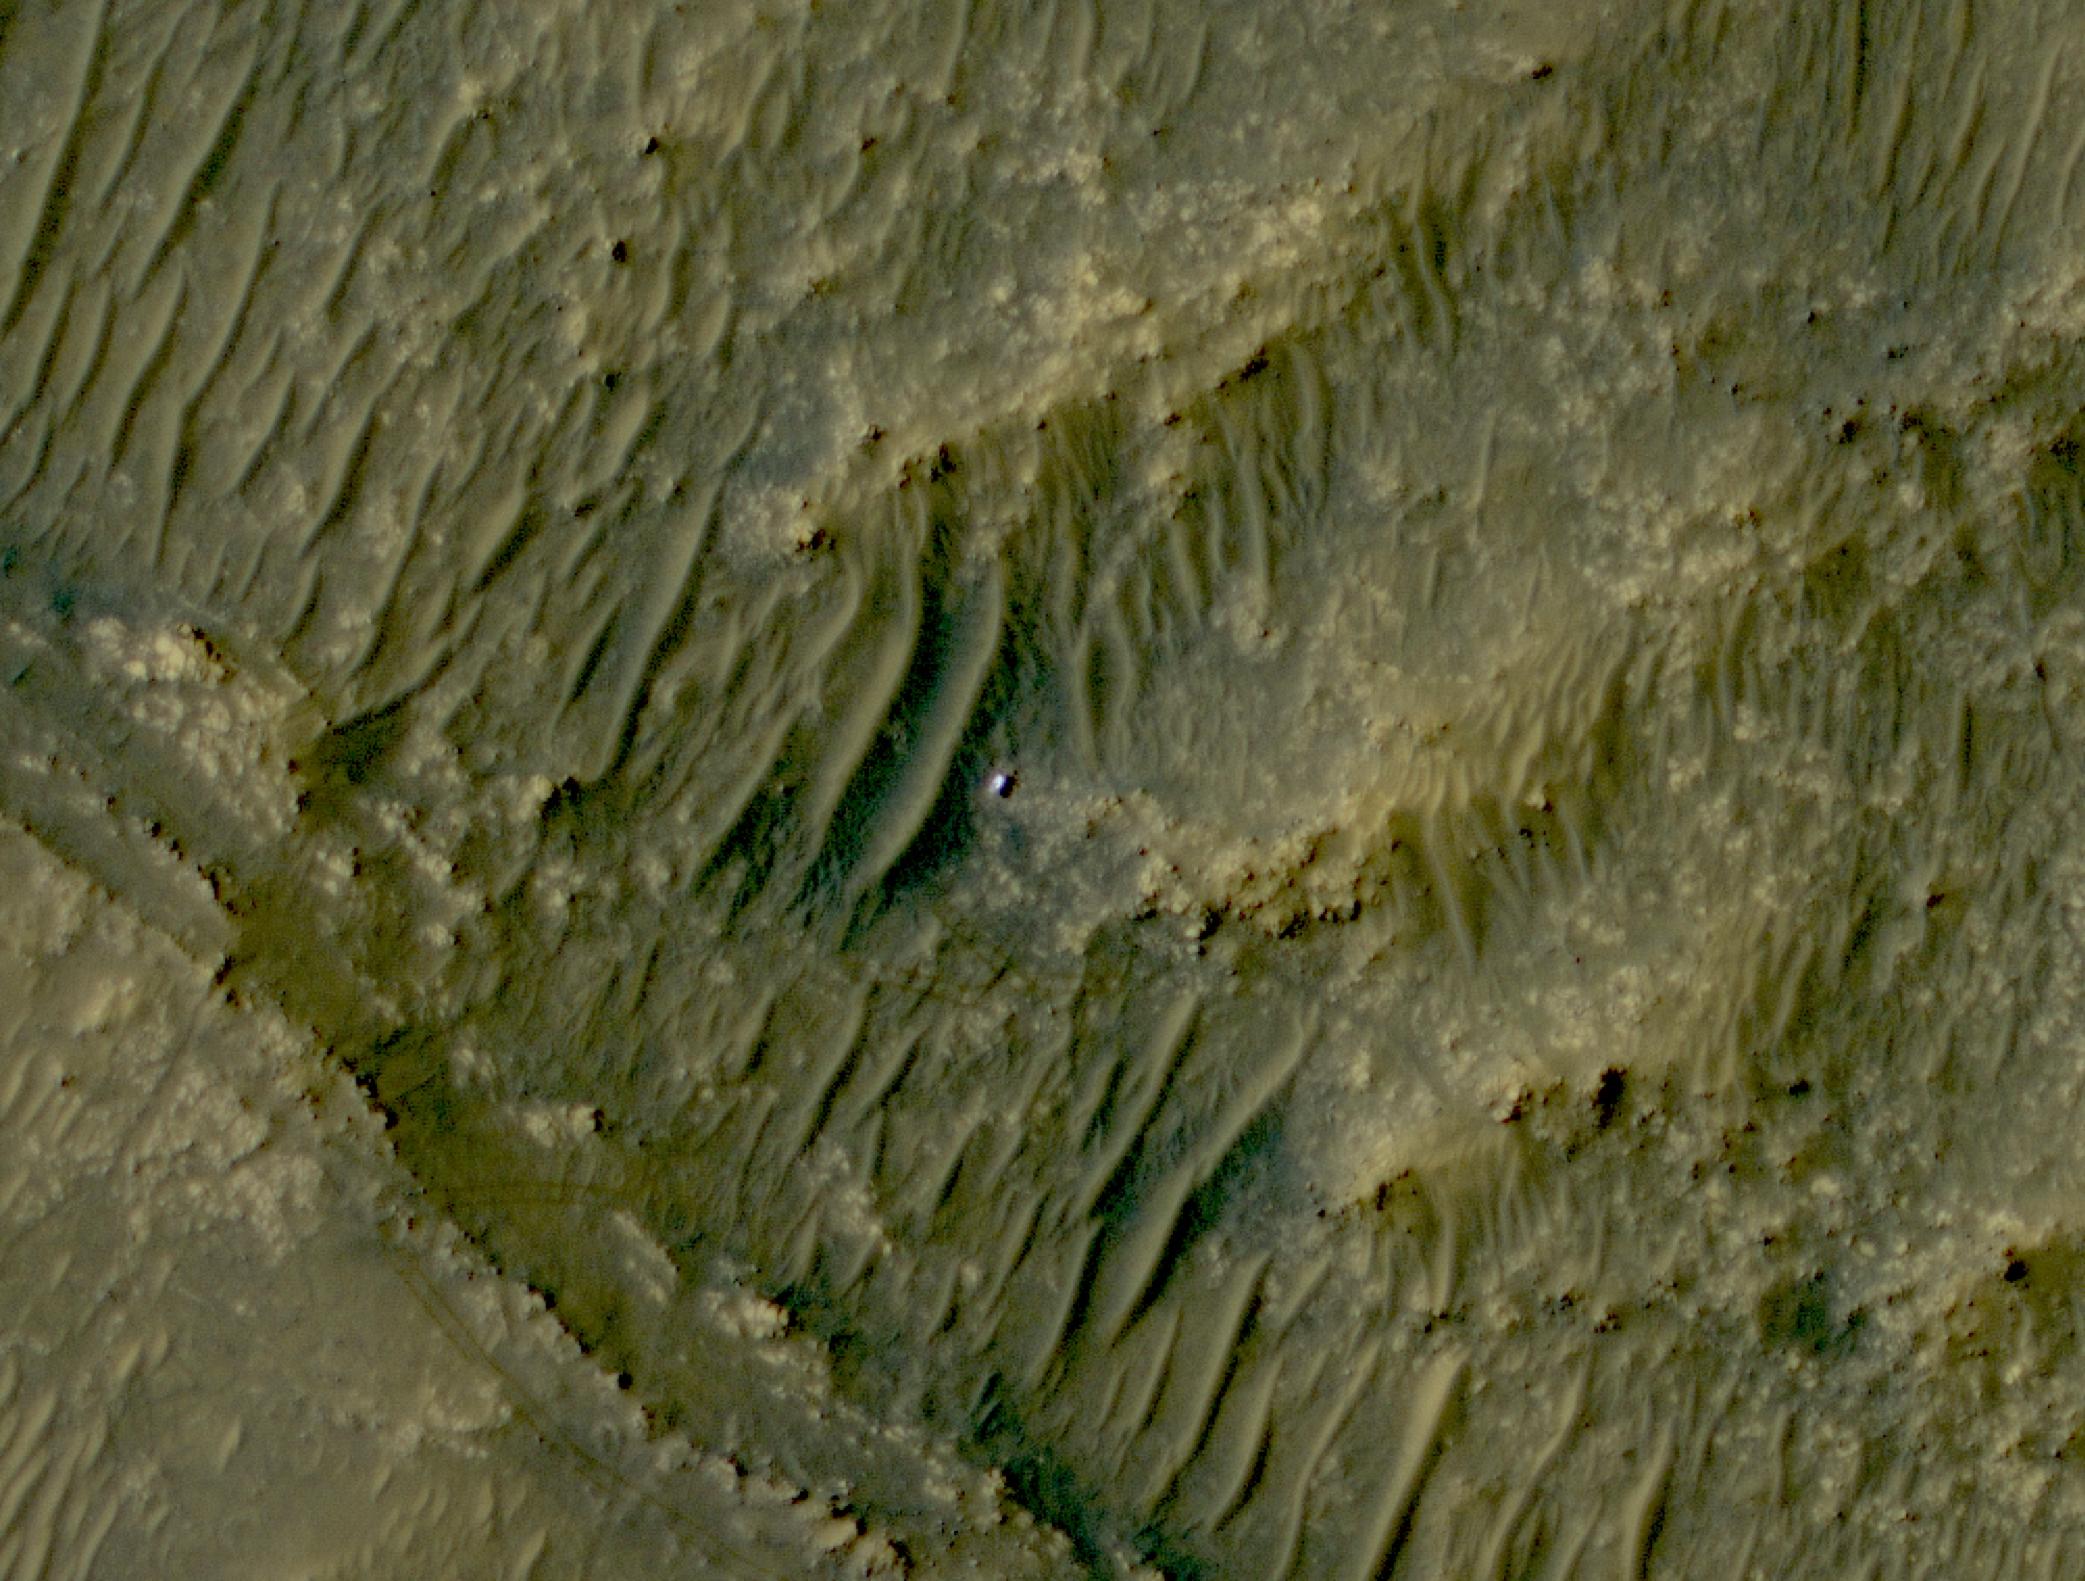 The white speck is NASA’s Perseverance rover in the “South Séítah” area of Mars’ Jezero Crater.